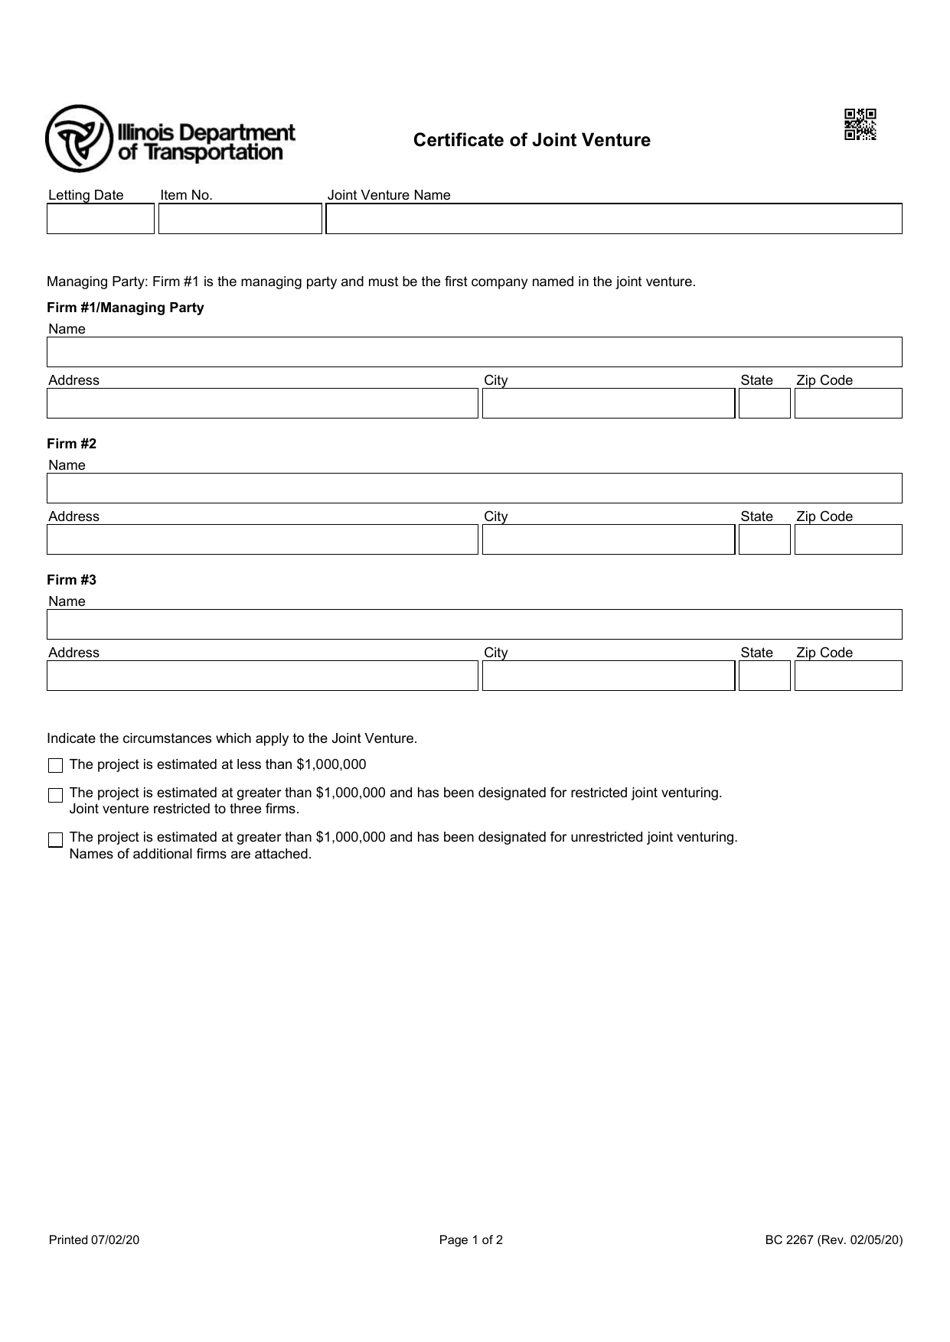 Form BC2267 Certificate of Joint Venture - Illinois, Page 1